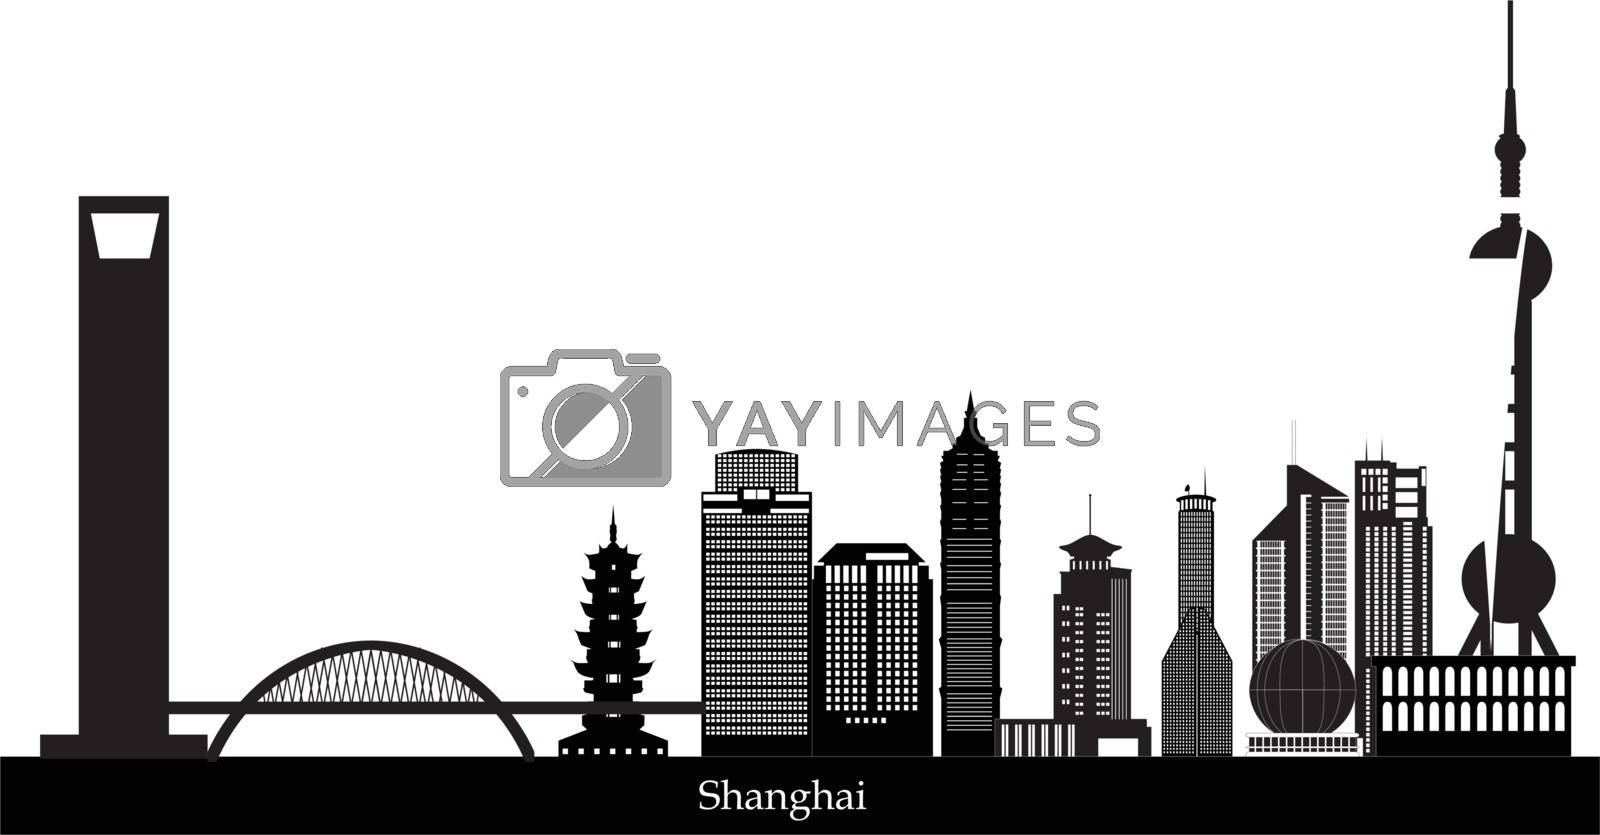 Royalty free image of shanghai skyline by compuinfoto